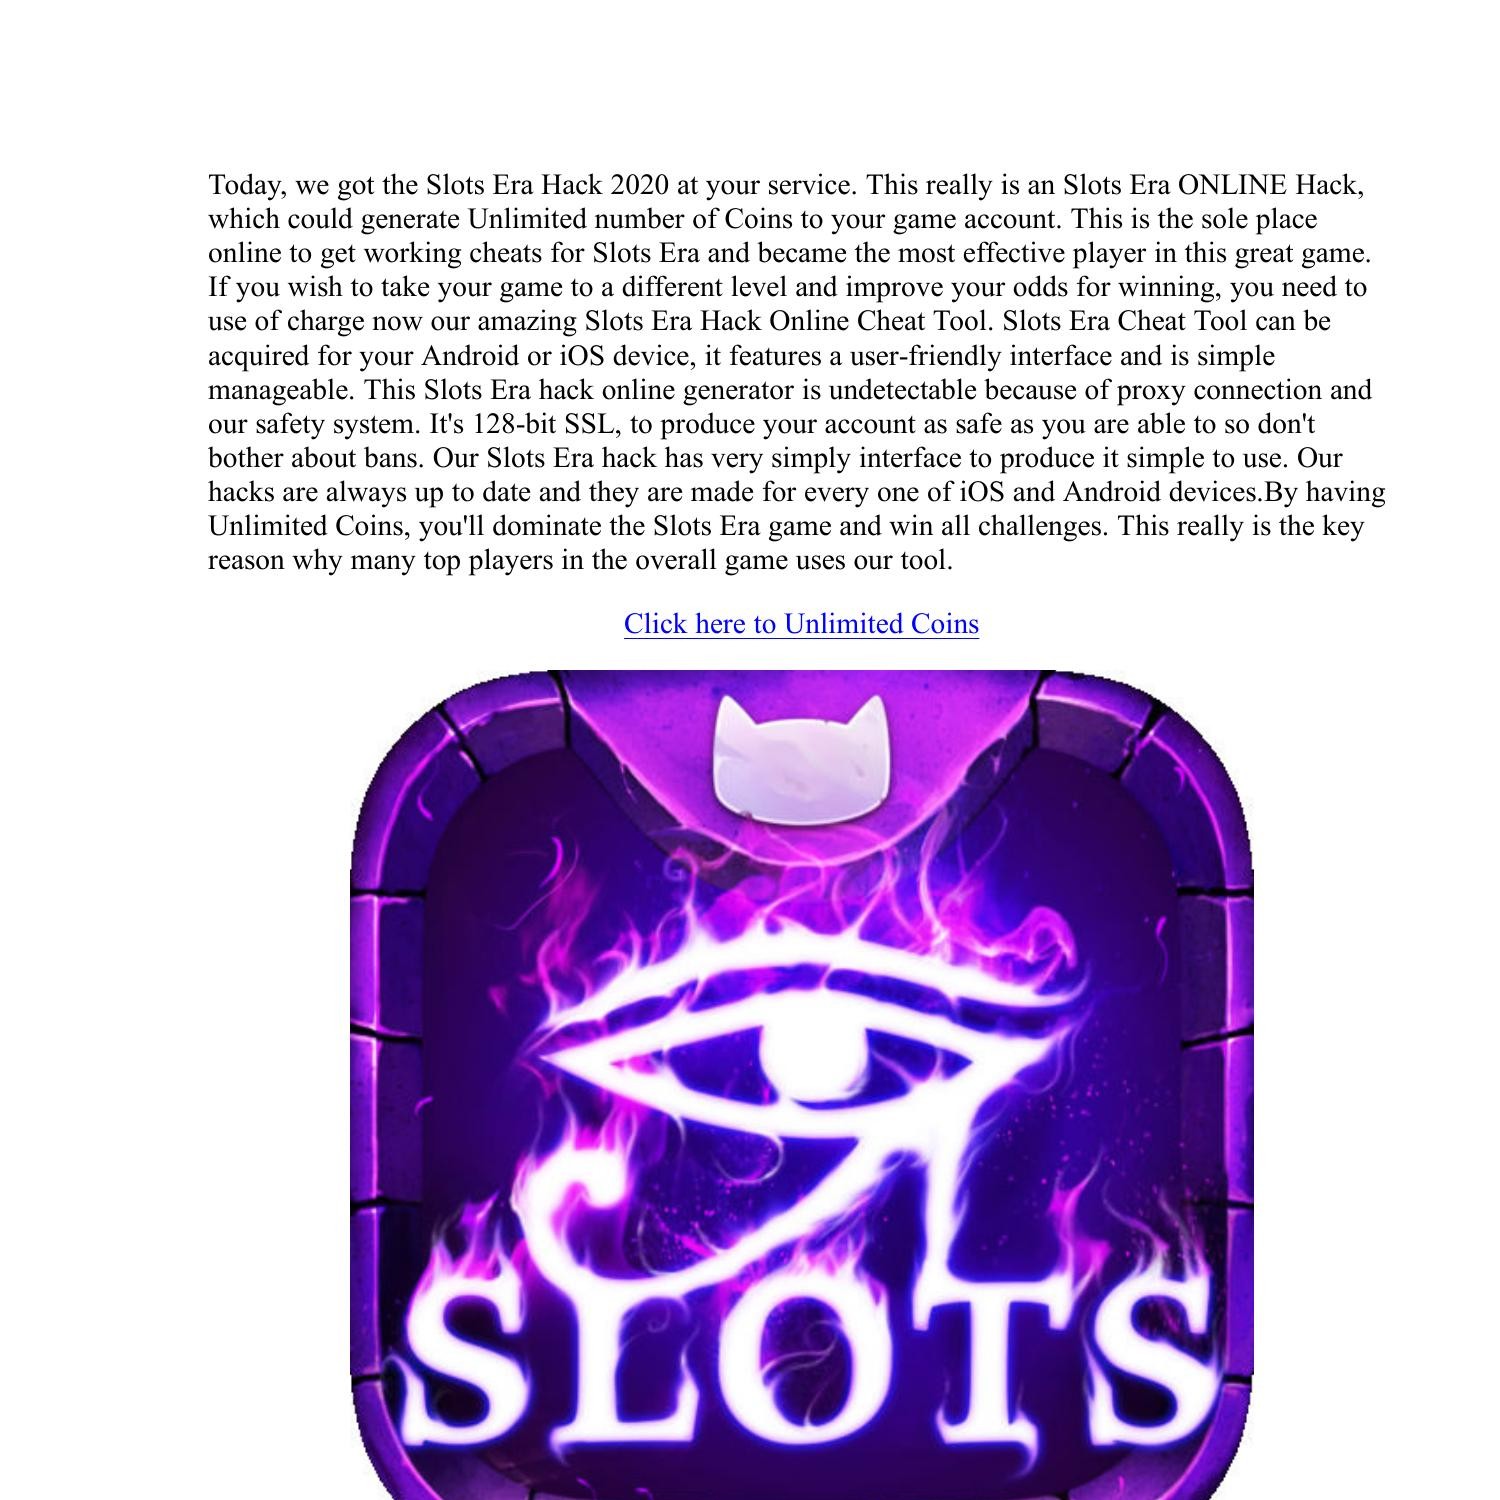 Slots Era Coins Generator! Yes you have to take a survey but it only took 2 minutes and now I generated 20M!